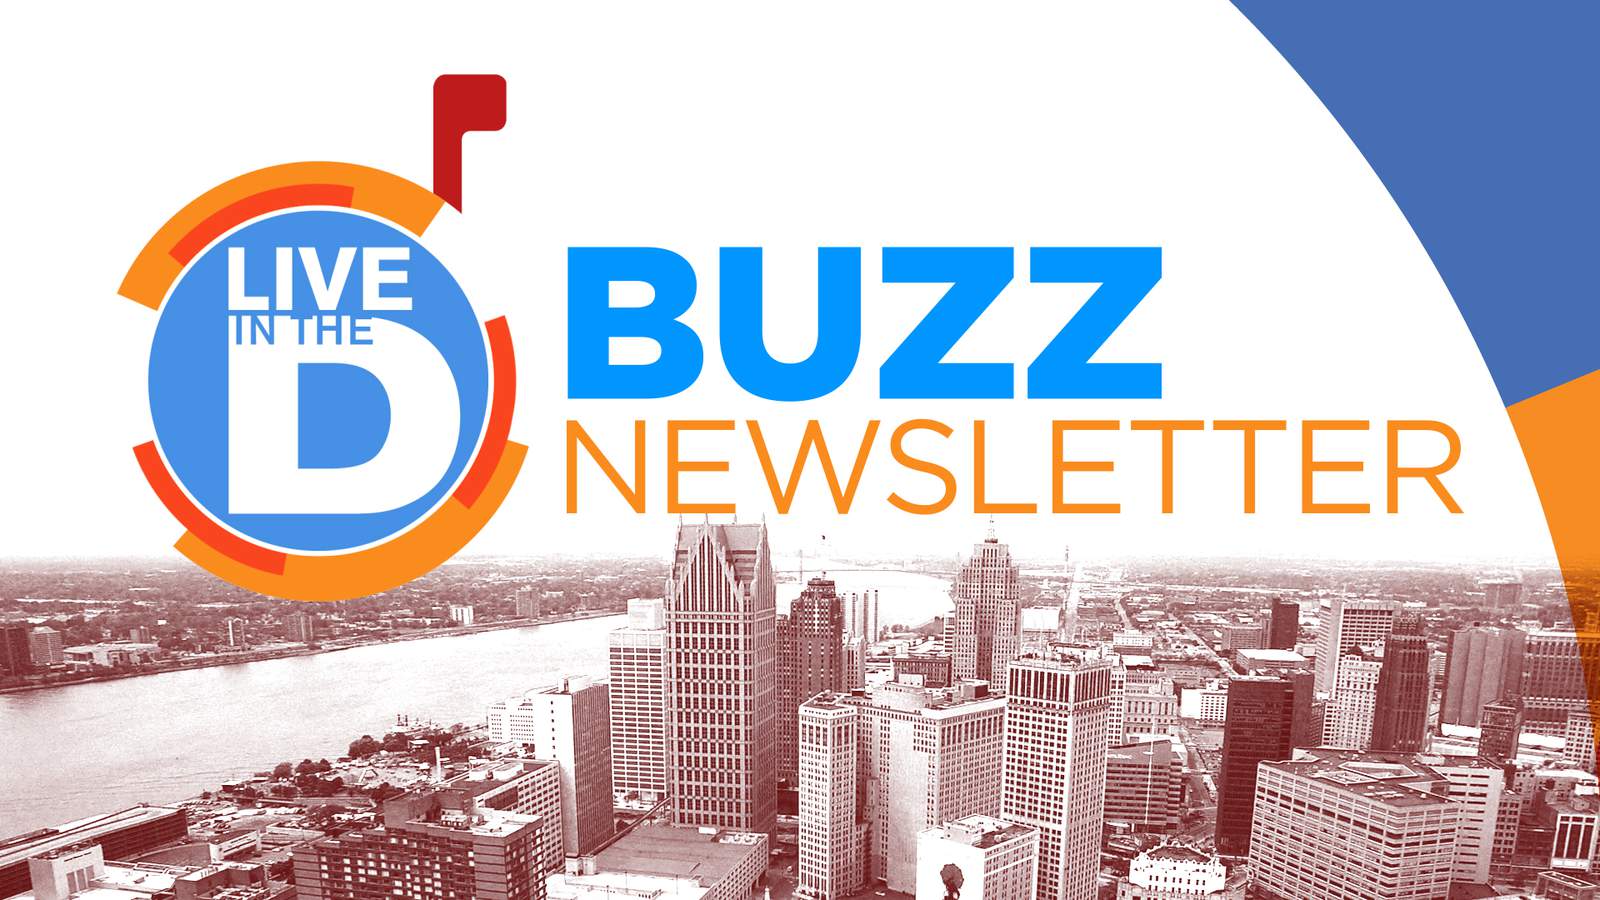 Get the ‘Live in the D Buzz’ Newsletter